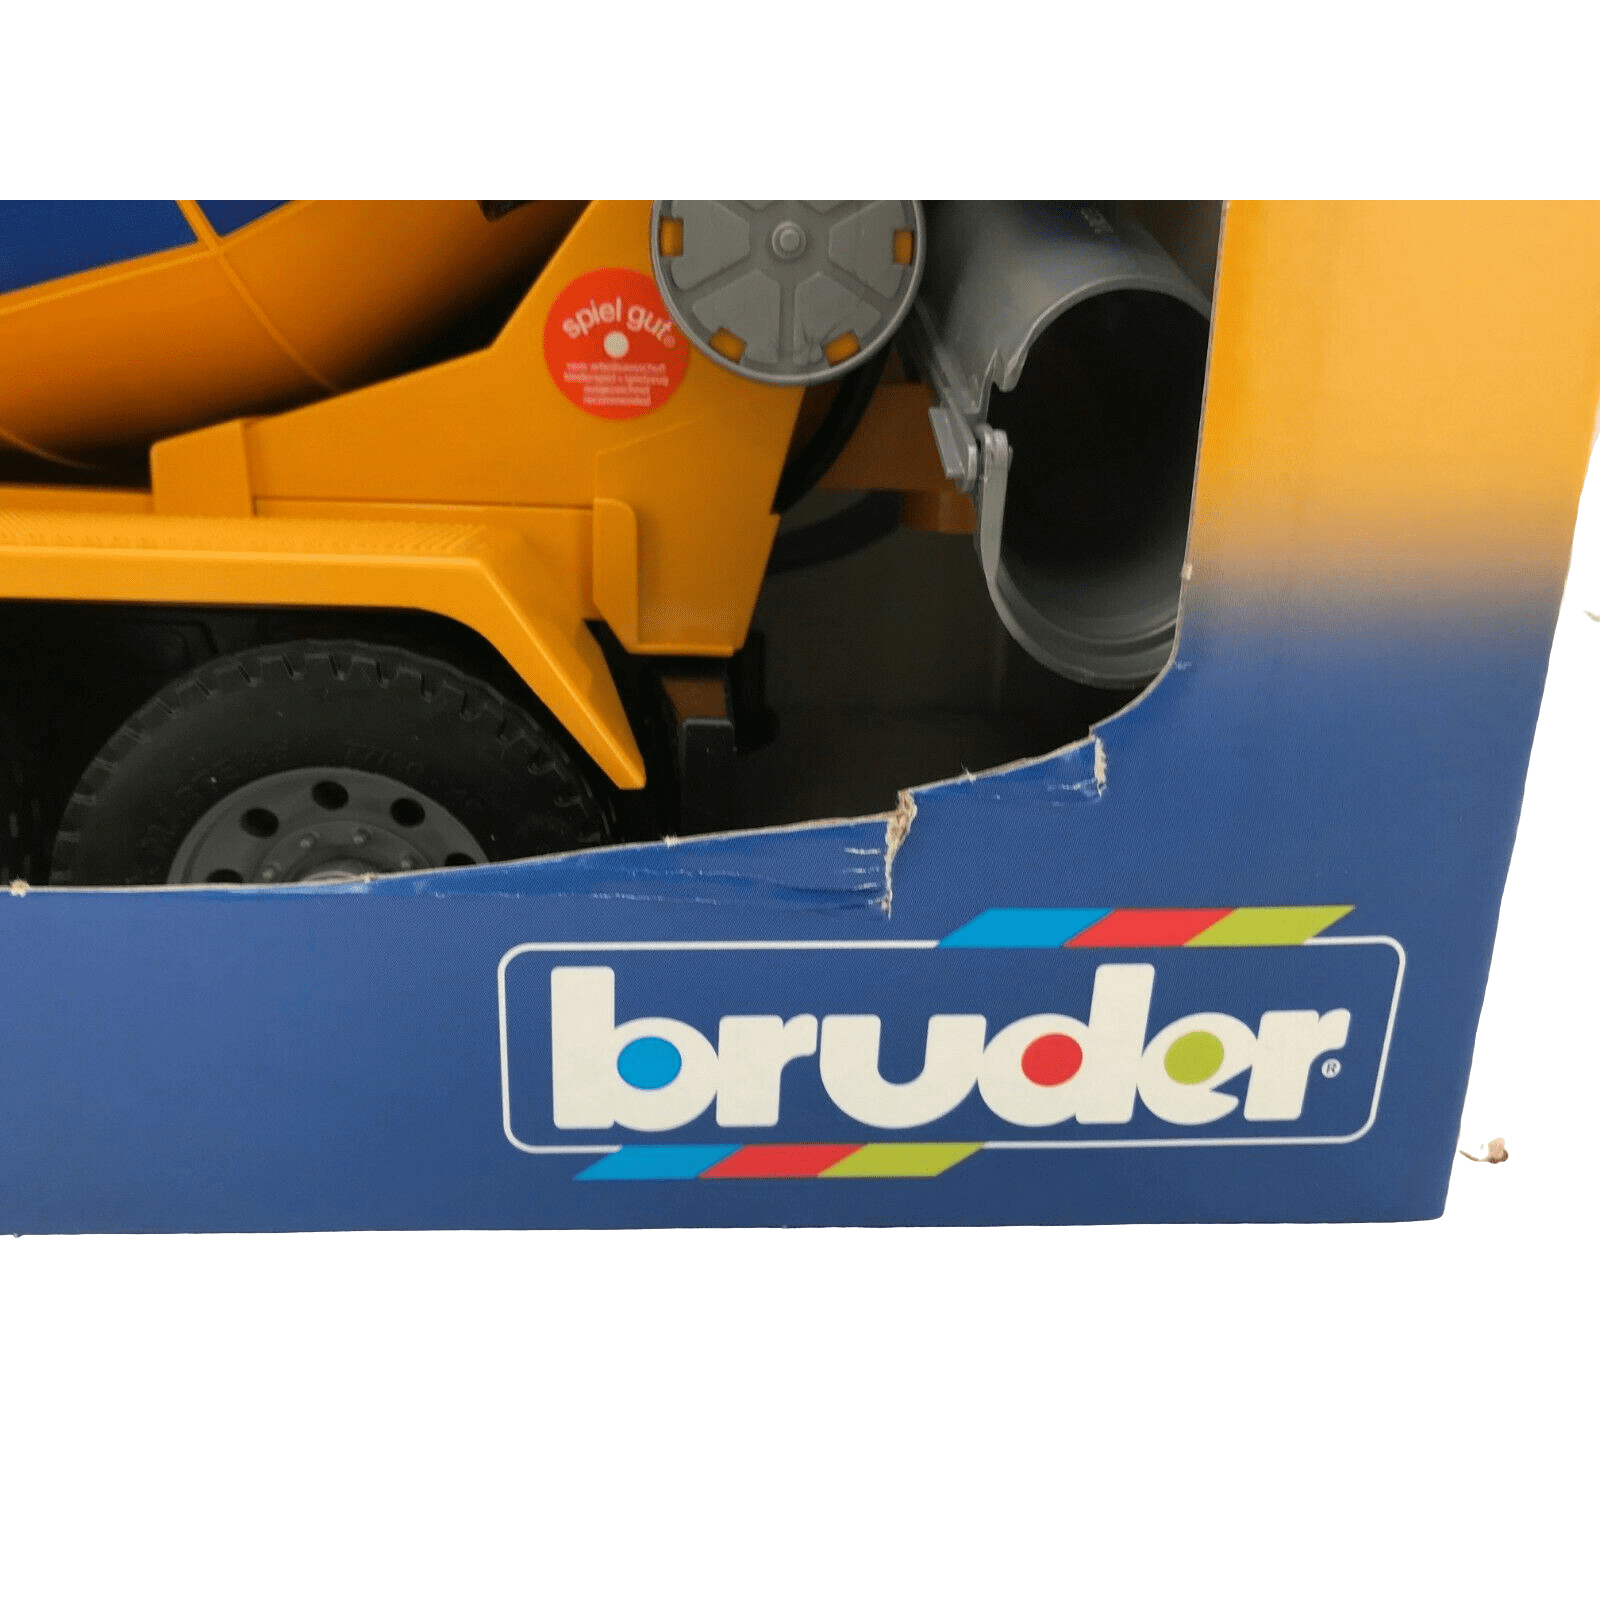 Bruder Toy Cement Mixing Toy With multiple functions and in Blue and Yellow